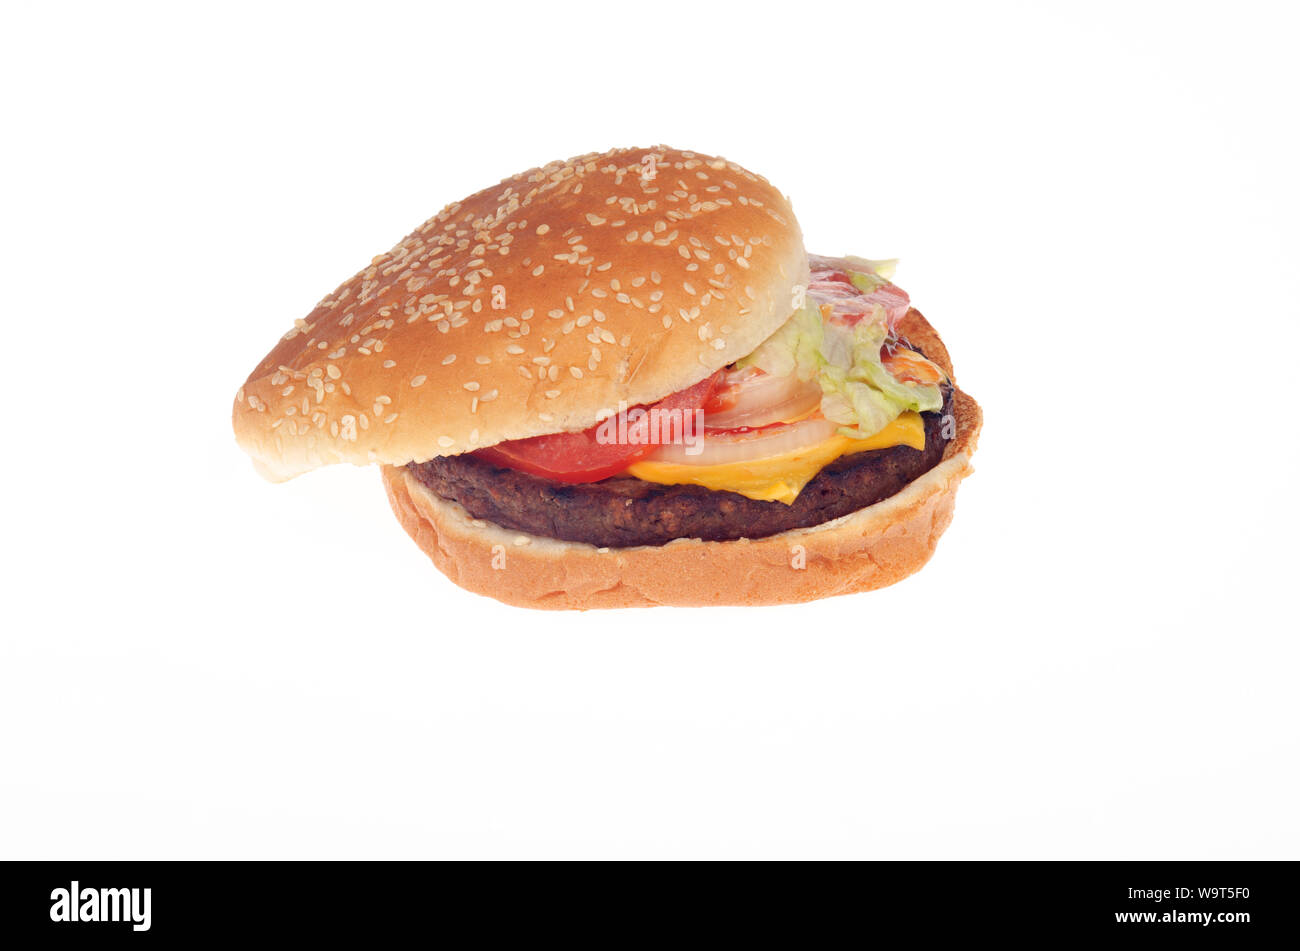 Burger King Impossible Whopper with cheese a vegetarian foods plant based patty Stock Photo